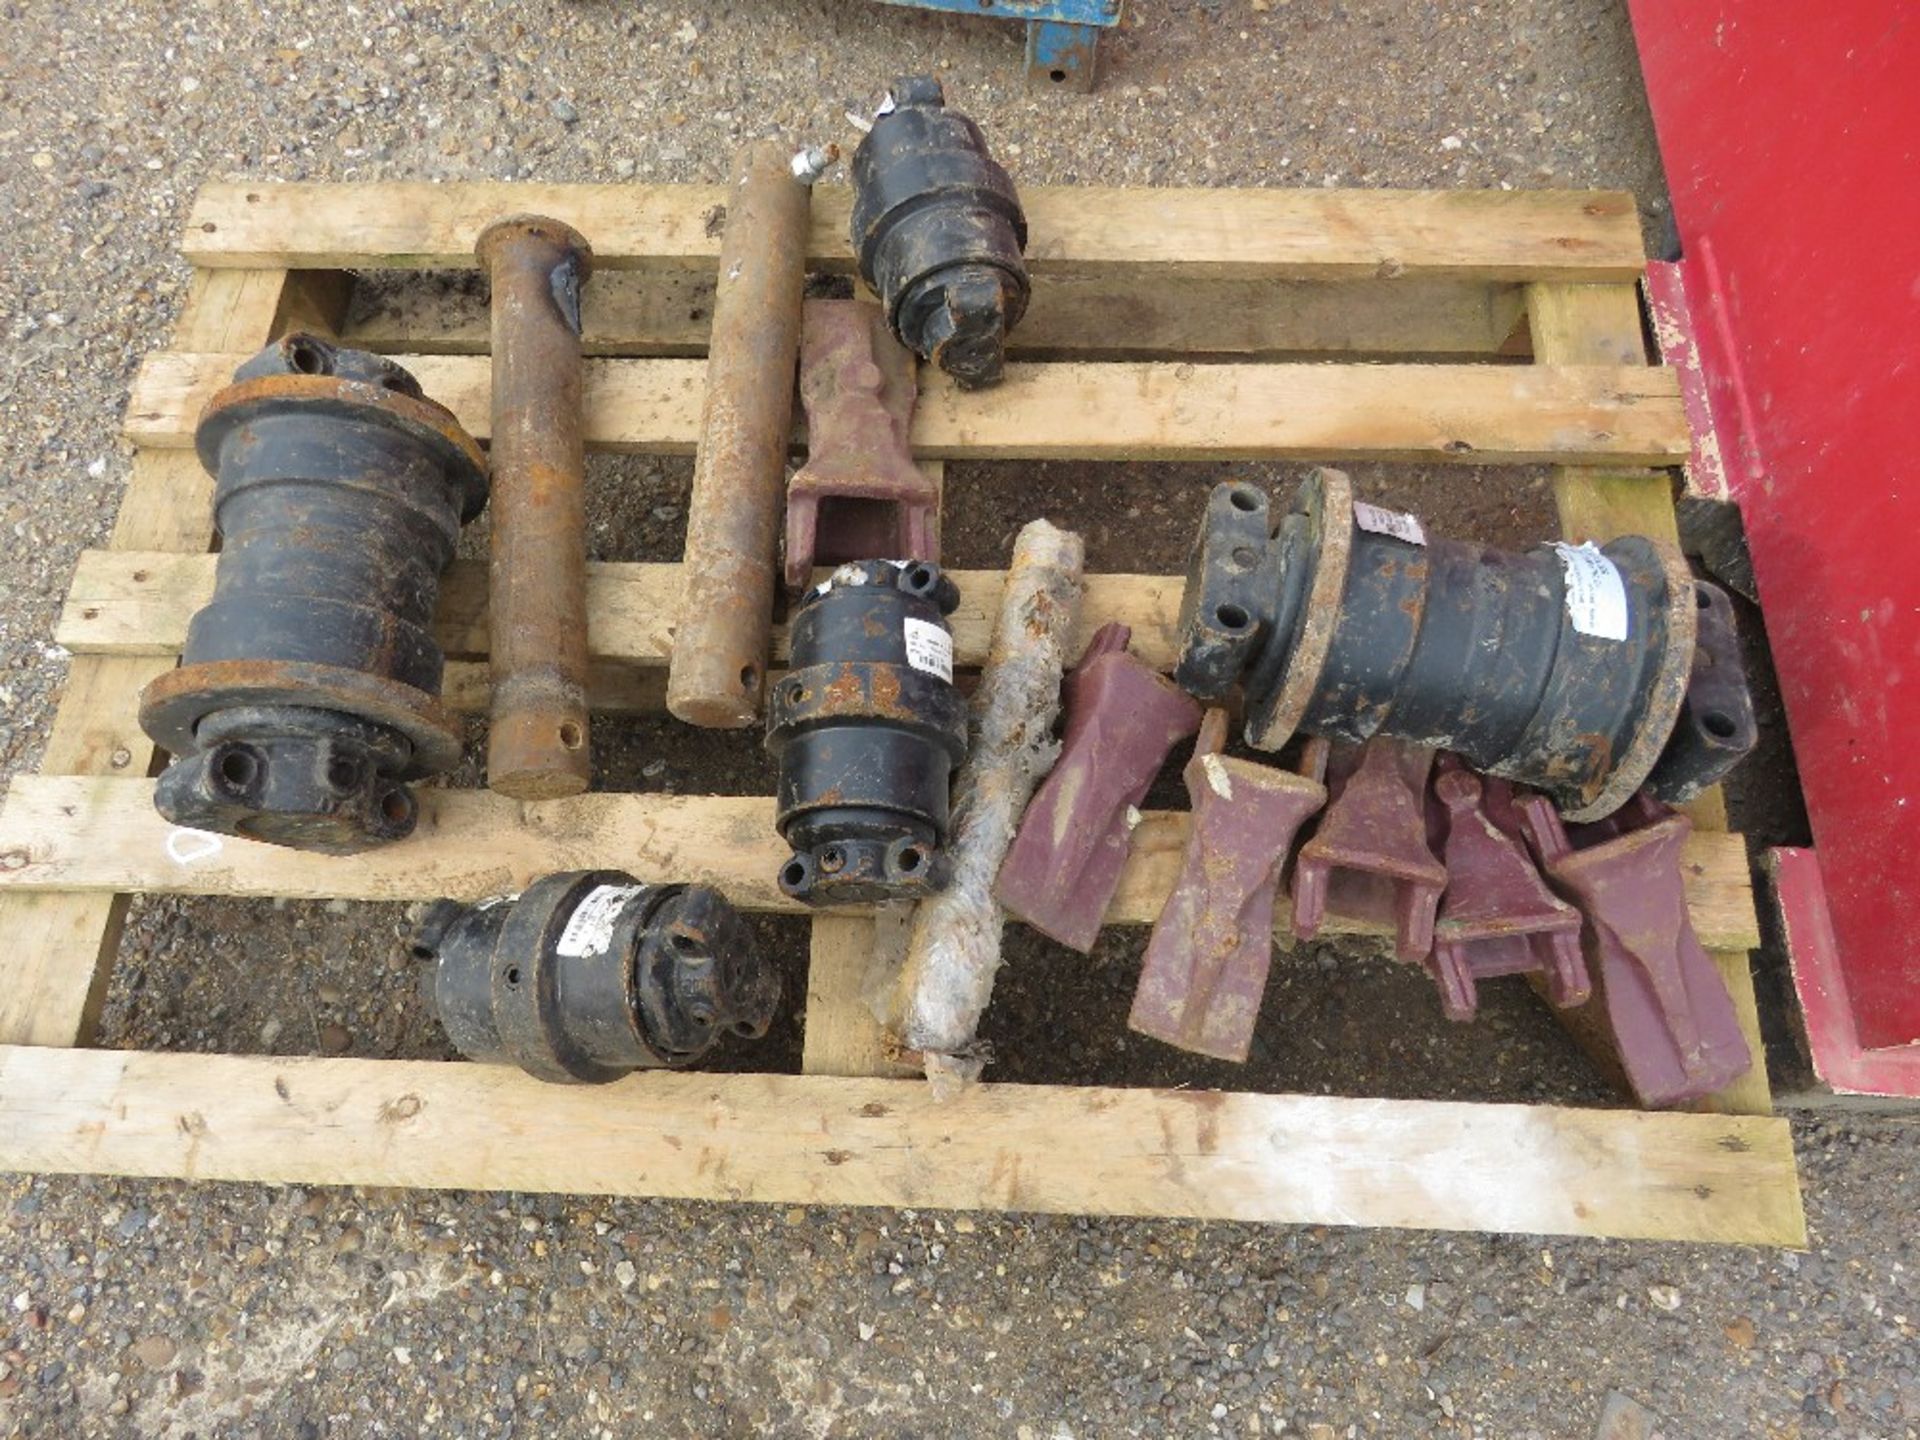 ASSORTED EXCAVATOR TRACK ROLLERS PLUS BUCKET TEETH AND PINS ETC......THIS LOT IS SOLD UNDER THE AUCT